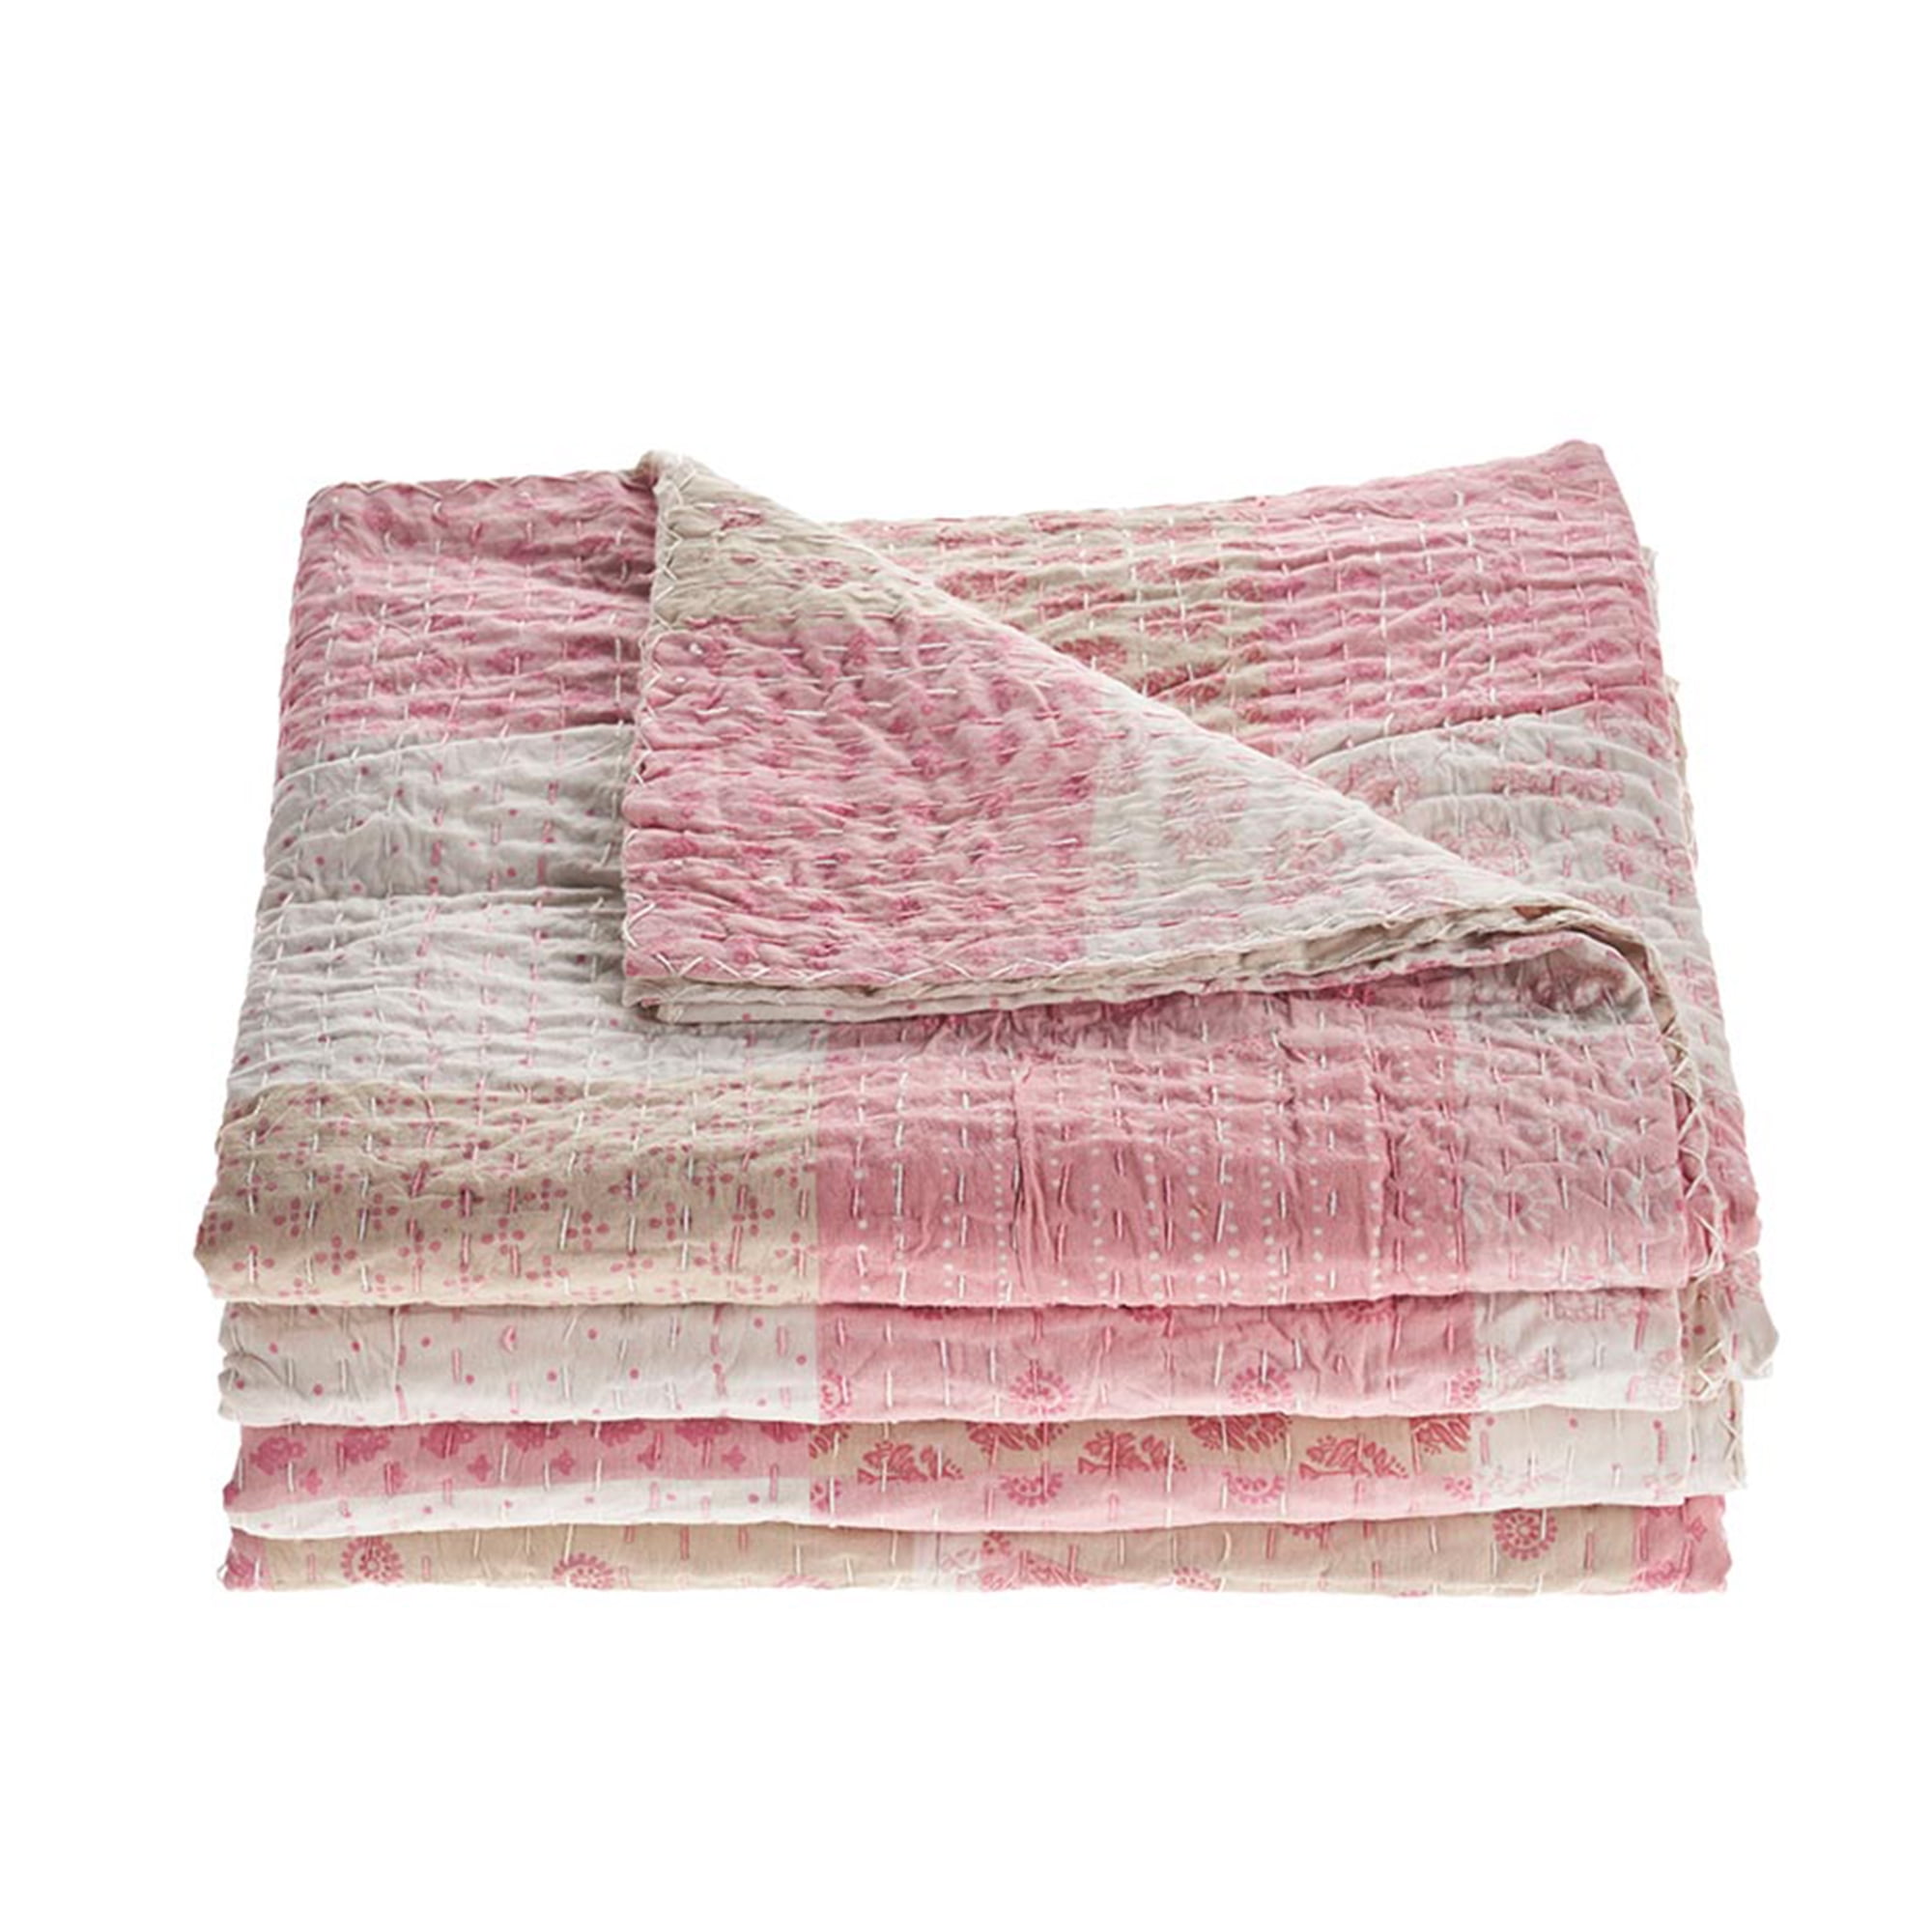 Details about   Pink Ikat Twin Size Kantha Quilt Cotton Reversible Bed Cover Blanket Throw New* 